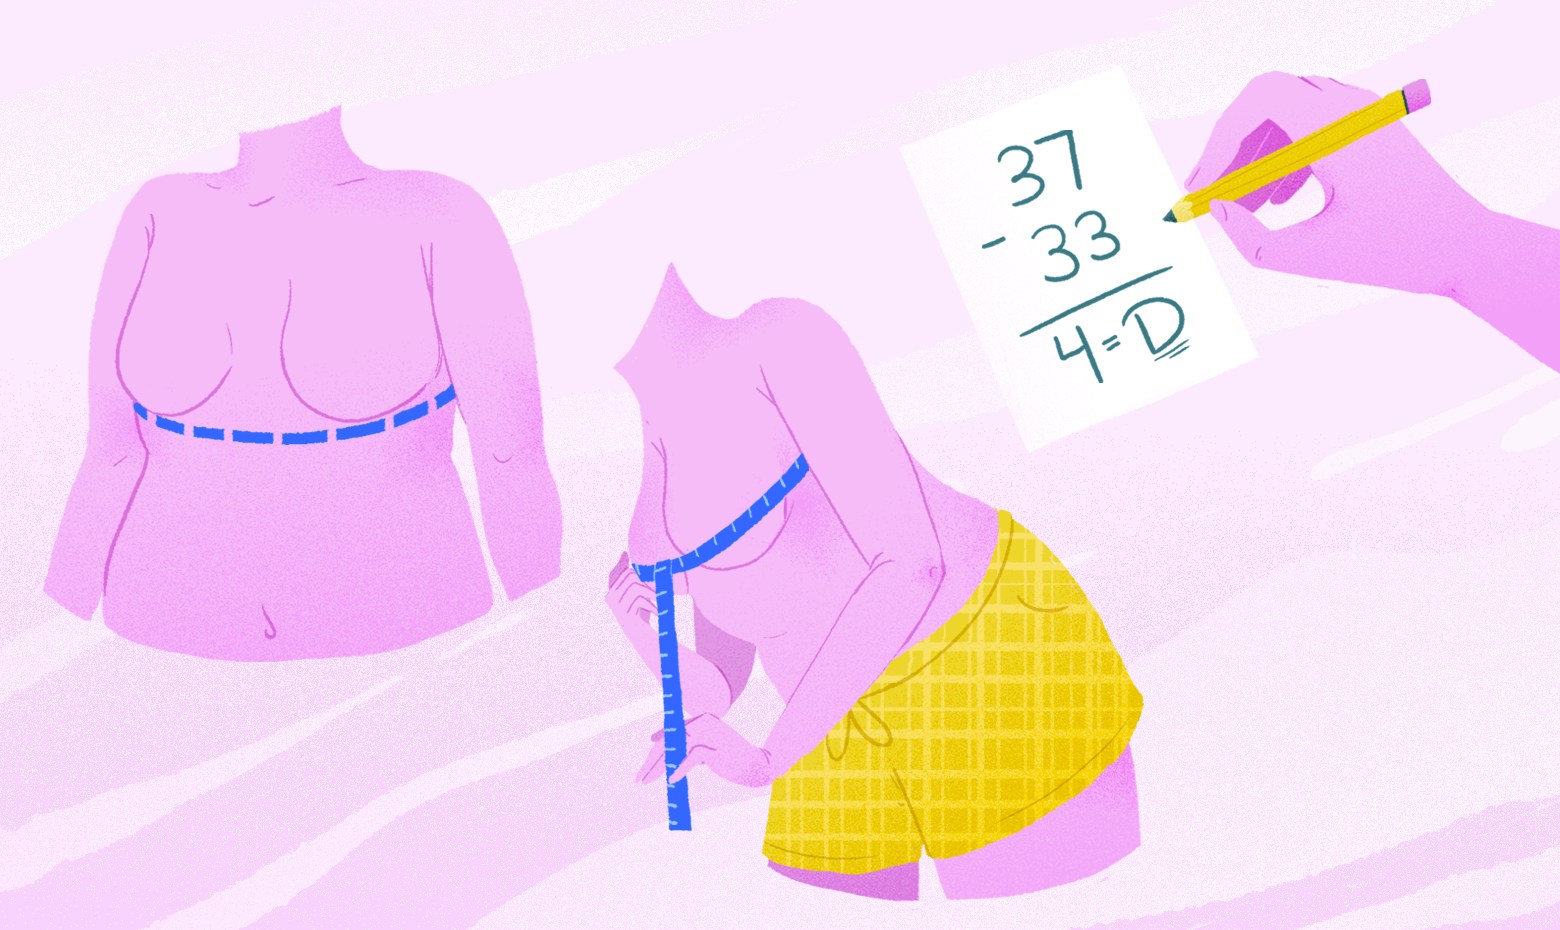 How to properly measure your bra size at home in 4 simple steps